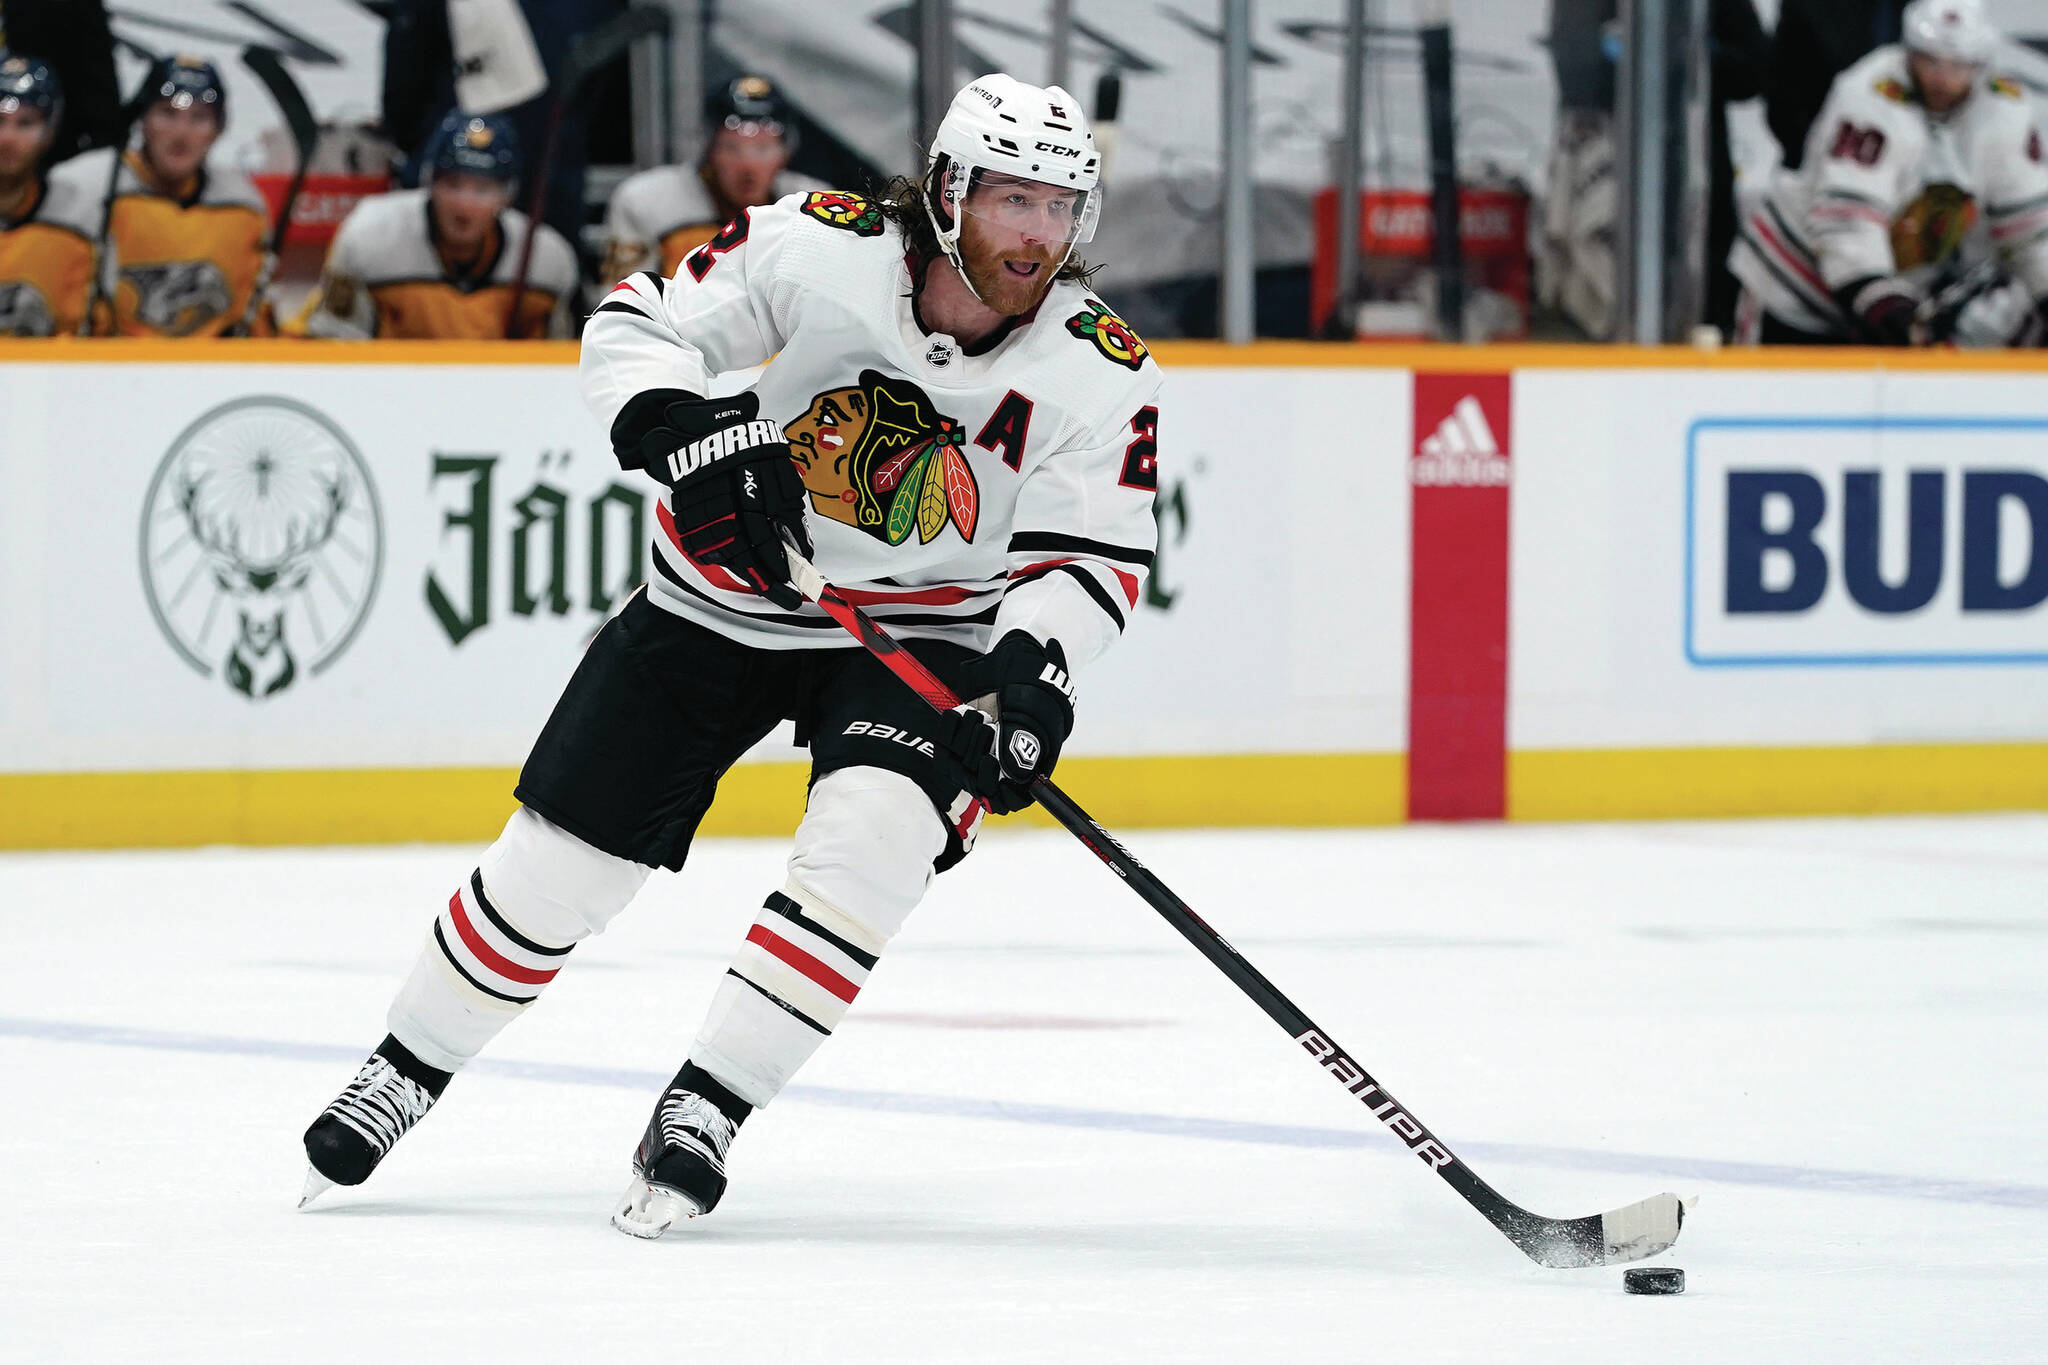 FILE - In this April 19, 2021, file photo, Chicago Blackhawks defenseman Duncan Keith (2) plays against the Nashville Predators in the first period of an NHL hockey game in Nashville, Tenn. (AP Photo/Mark Humphrey, File)